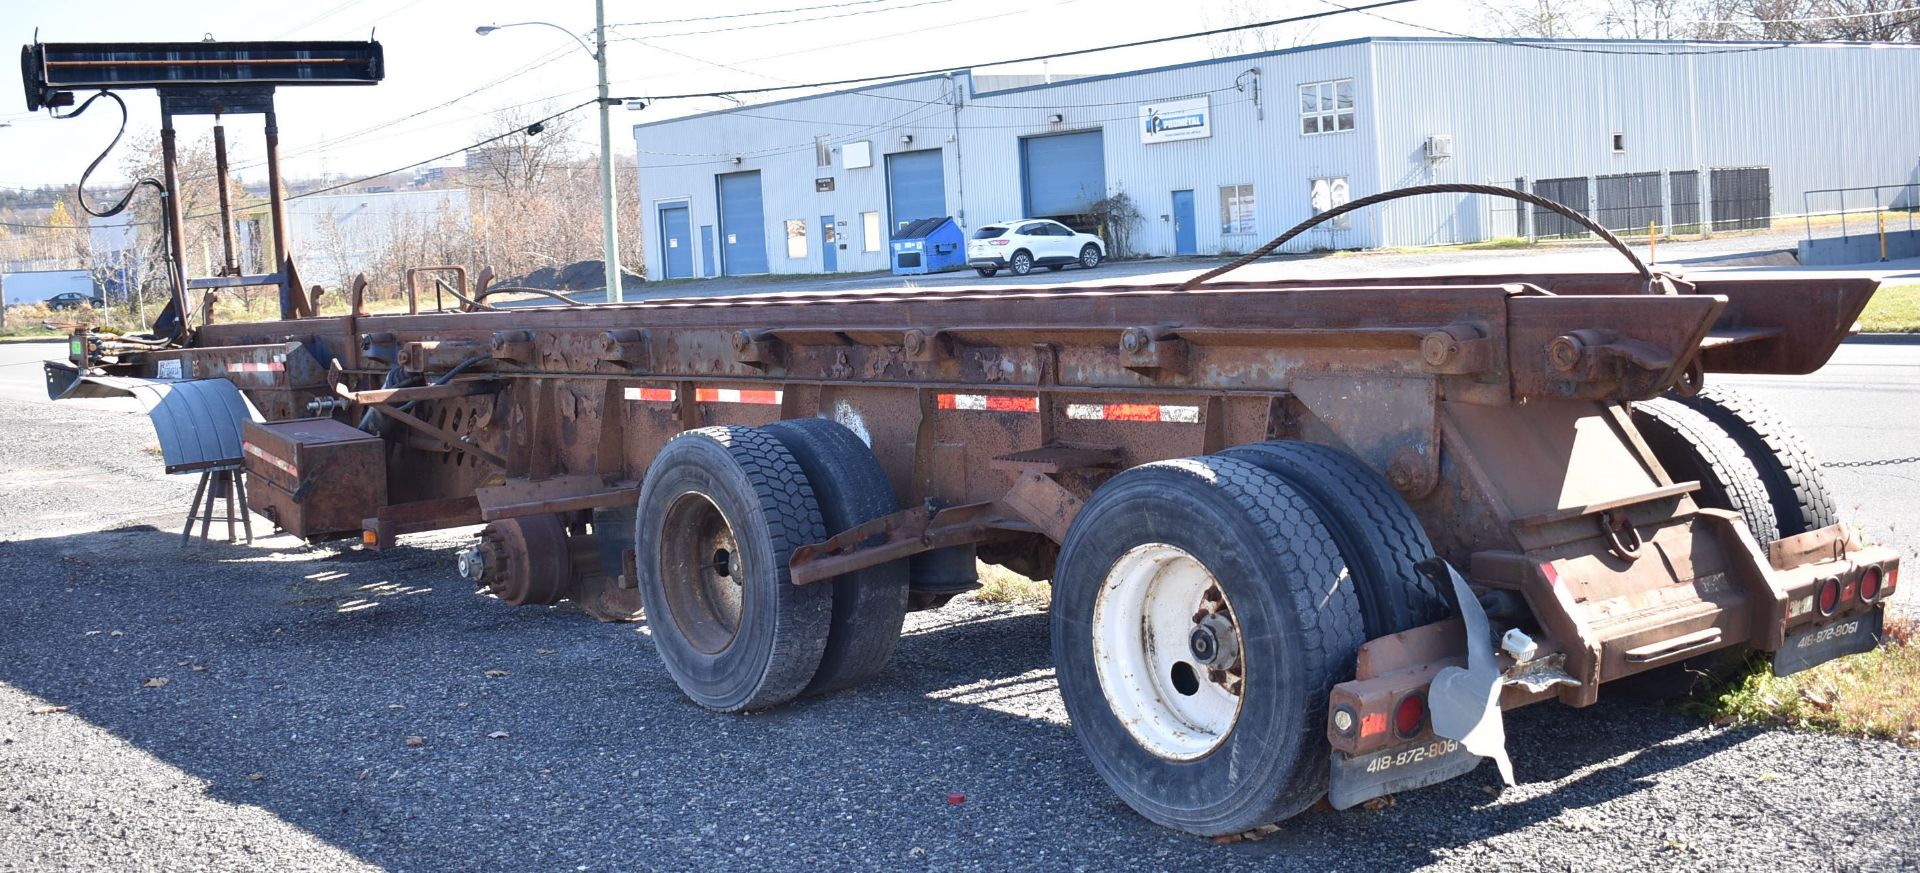 CHAGNON CT704 TRIAXLE 40' ROLL-OFF TRAILER, VIN 2C9SH1GC6WV057234 (NOT IN SERVICE) - Image 2 of 14